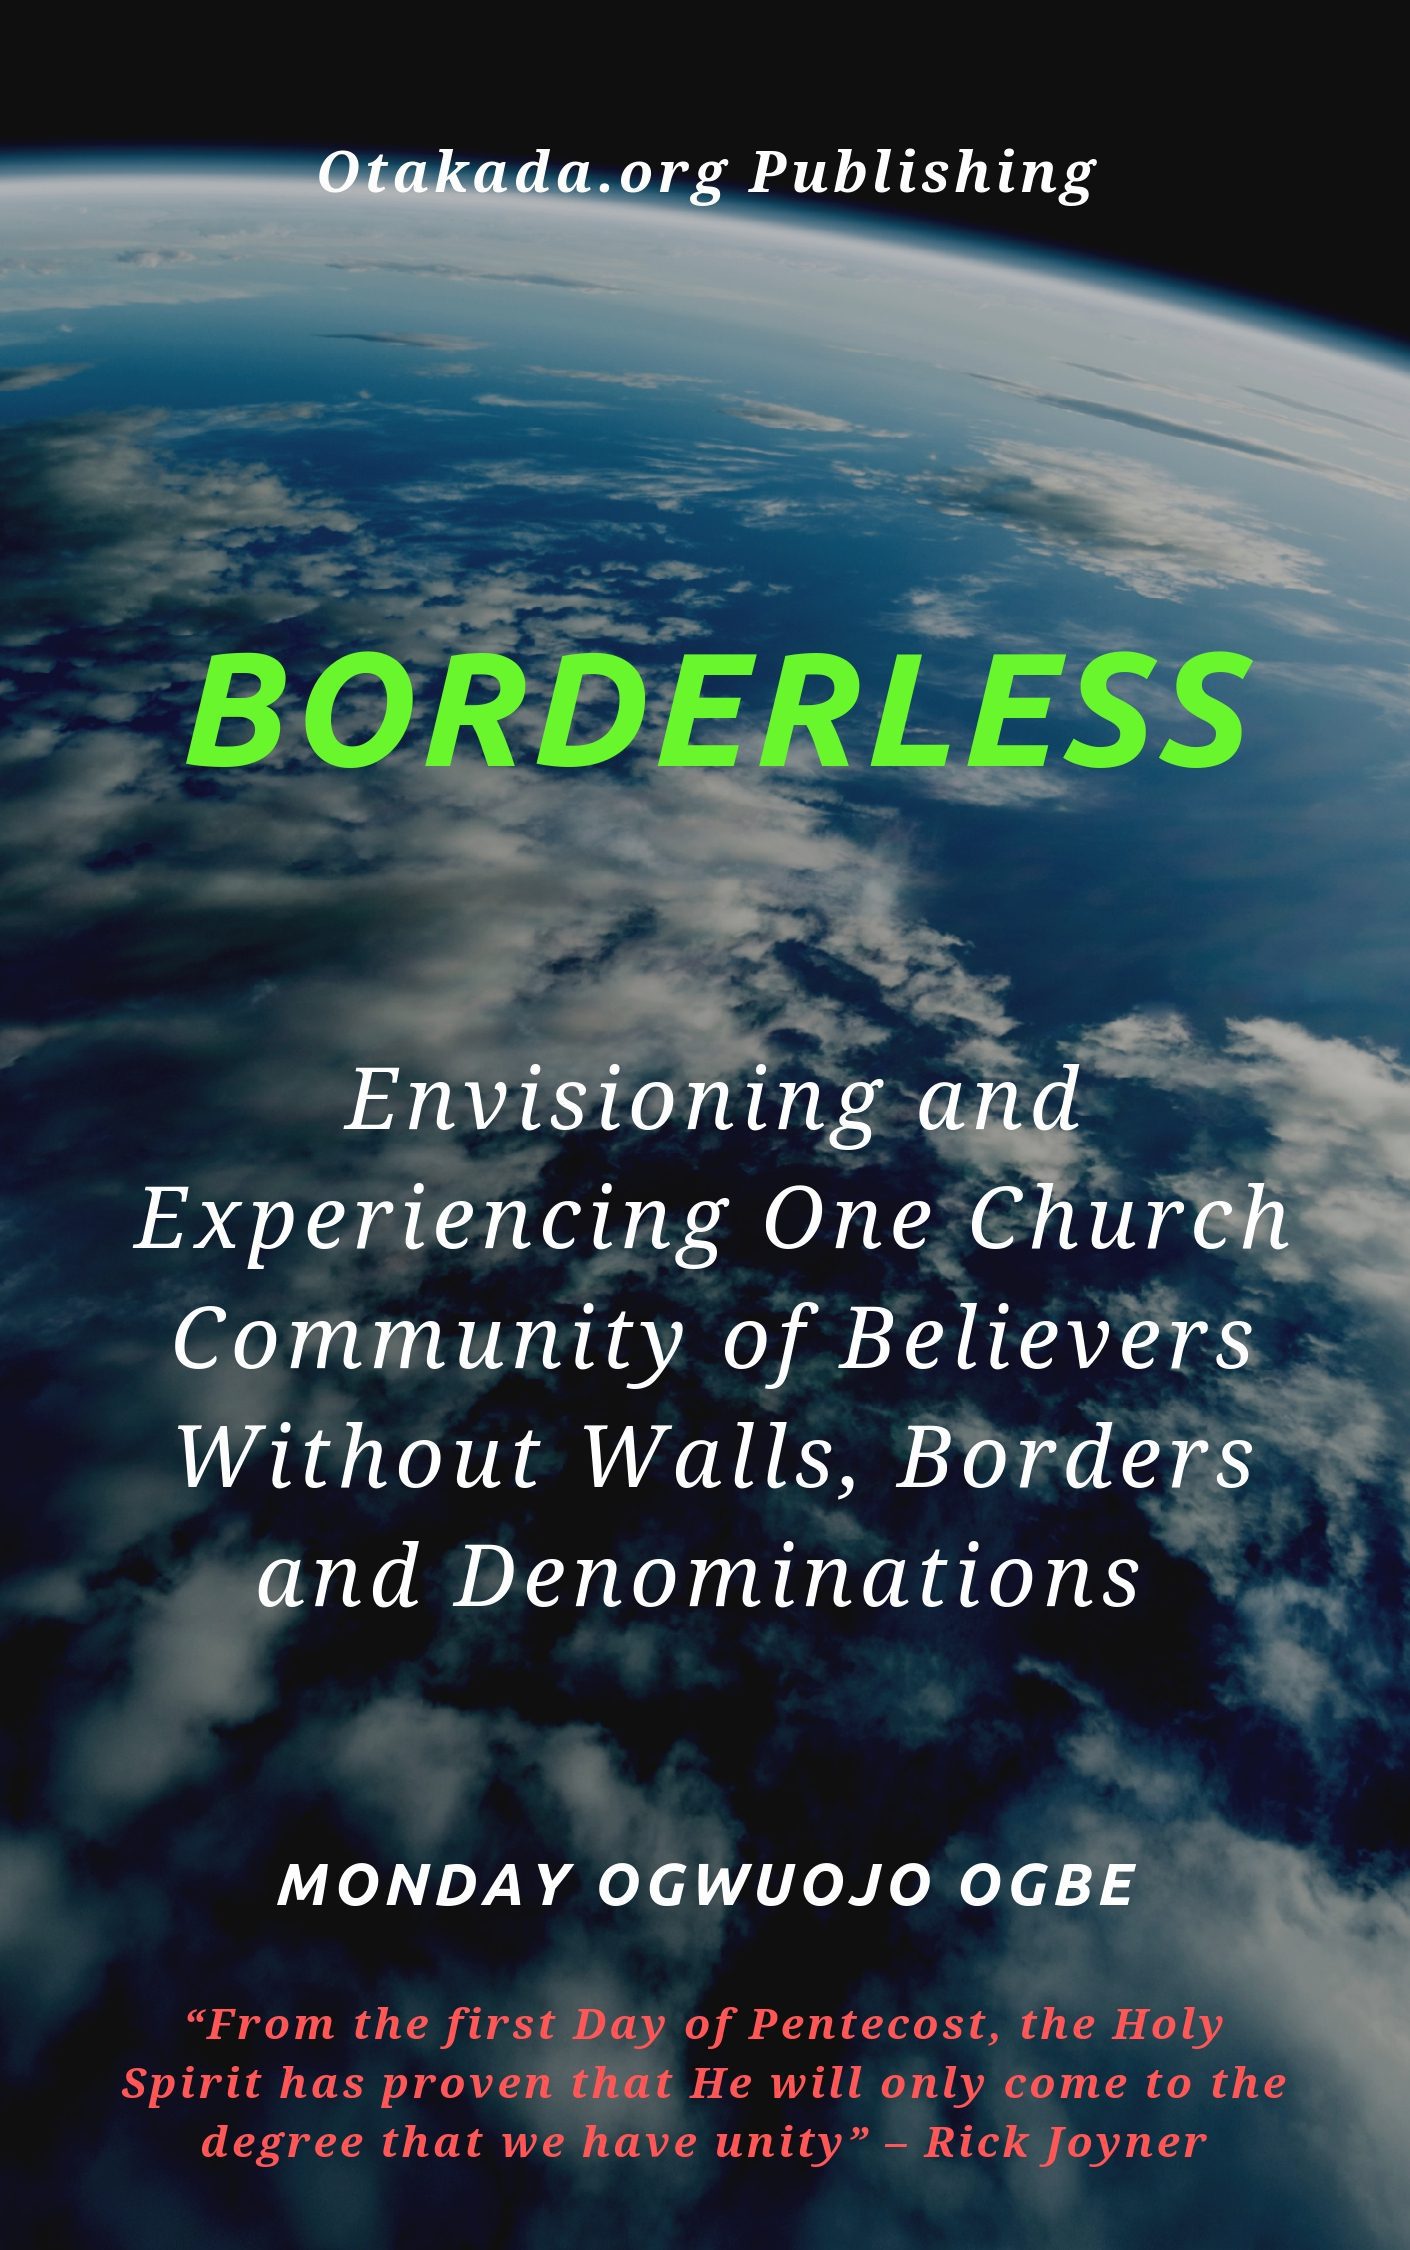 Borderless - Envisioning and Experiencing One Church Community of Believers Without Walls, Borders and Denominations